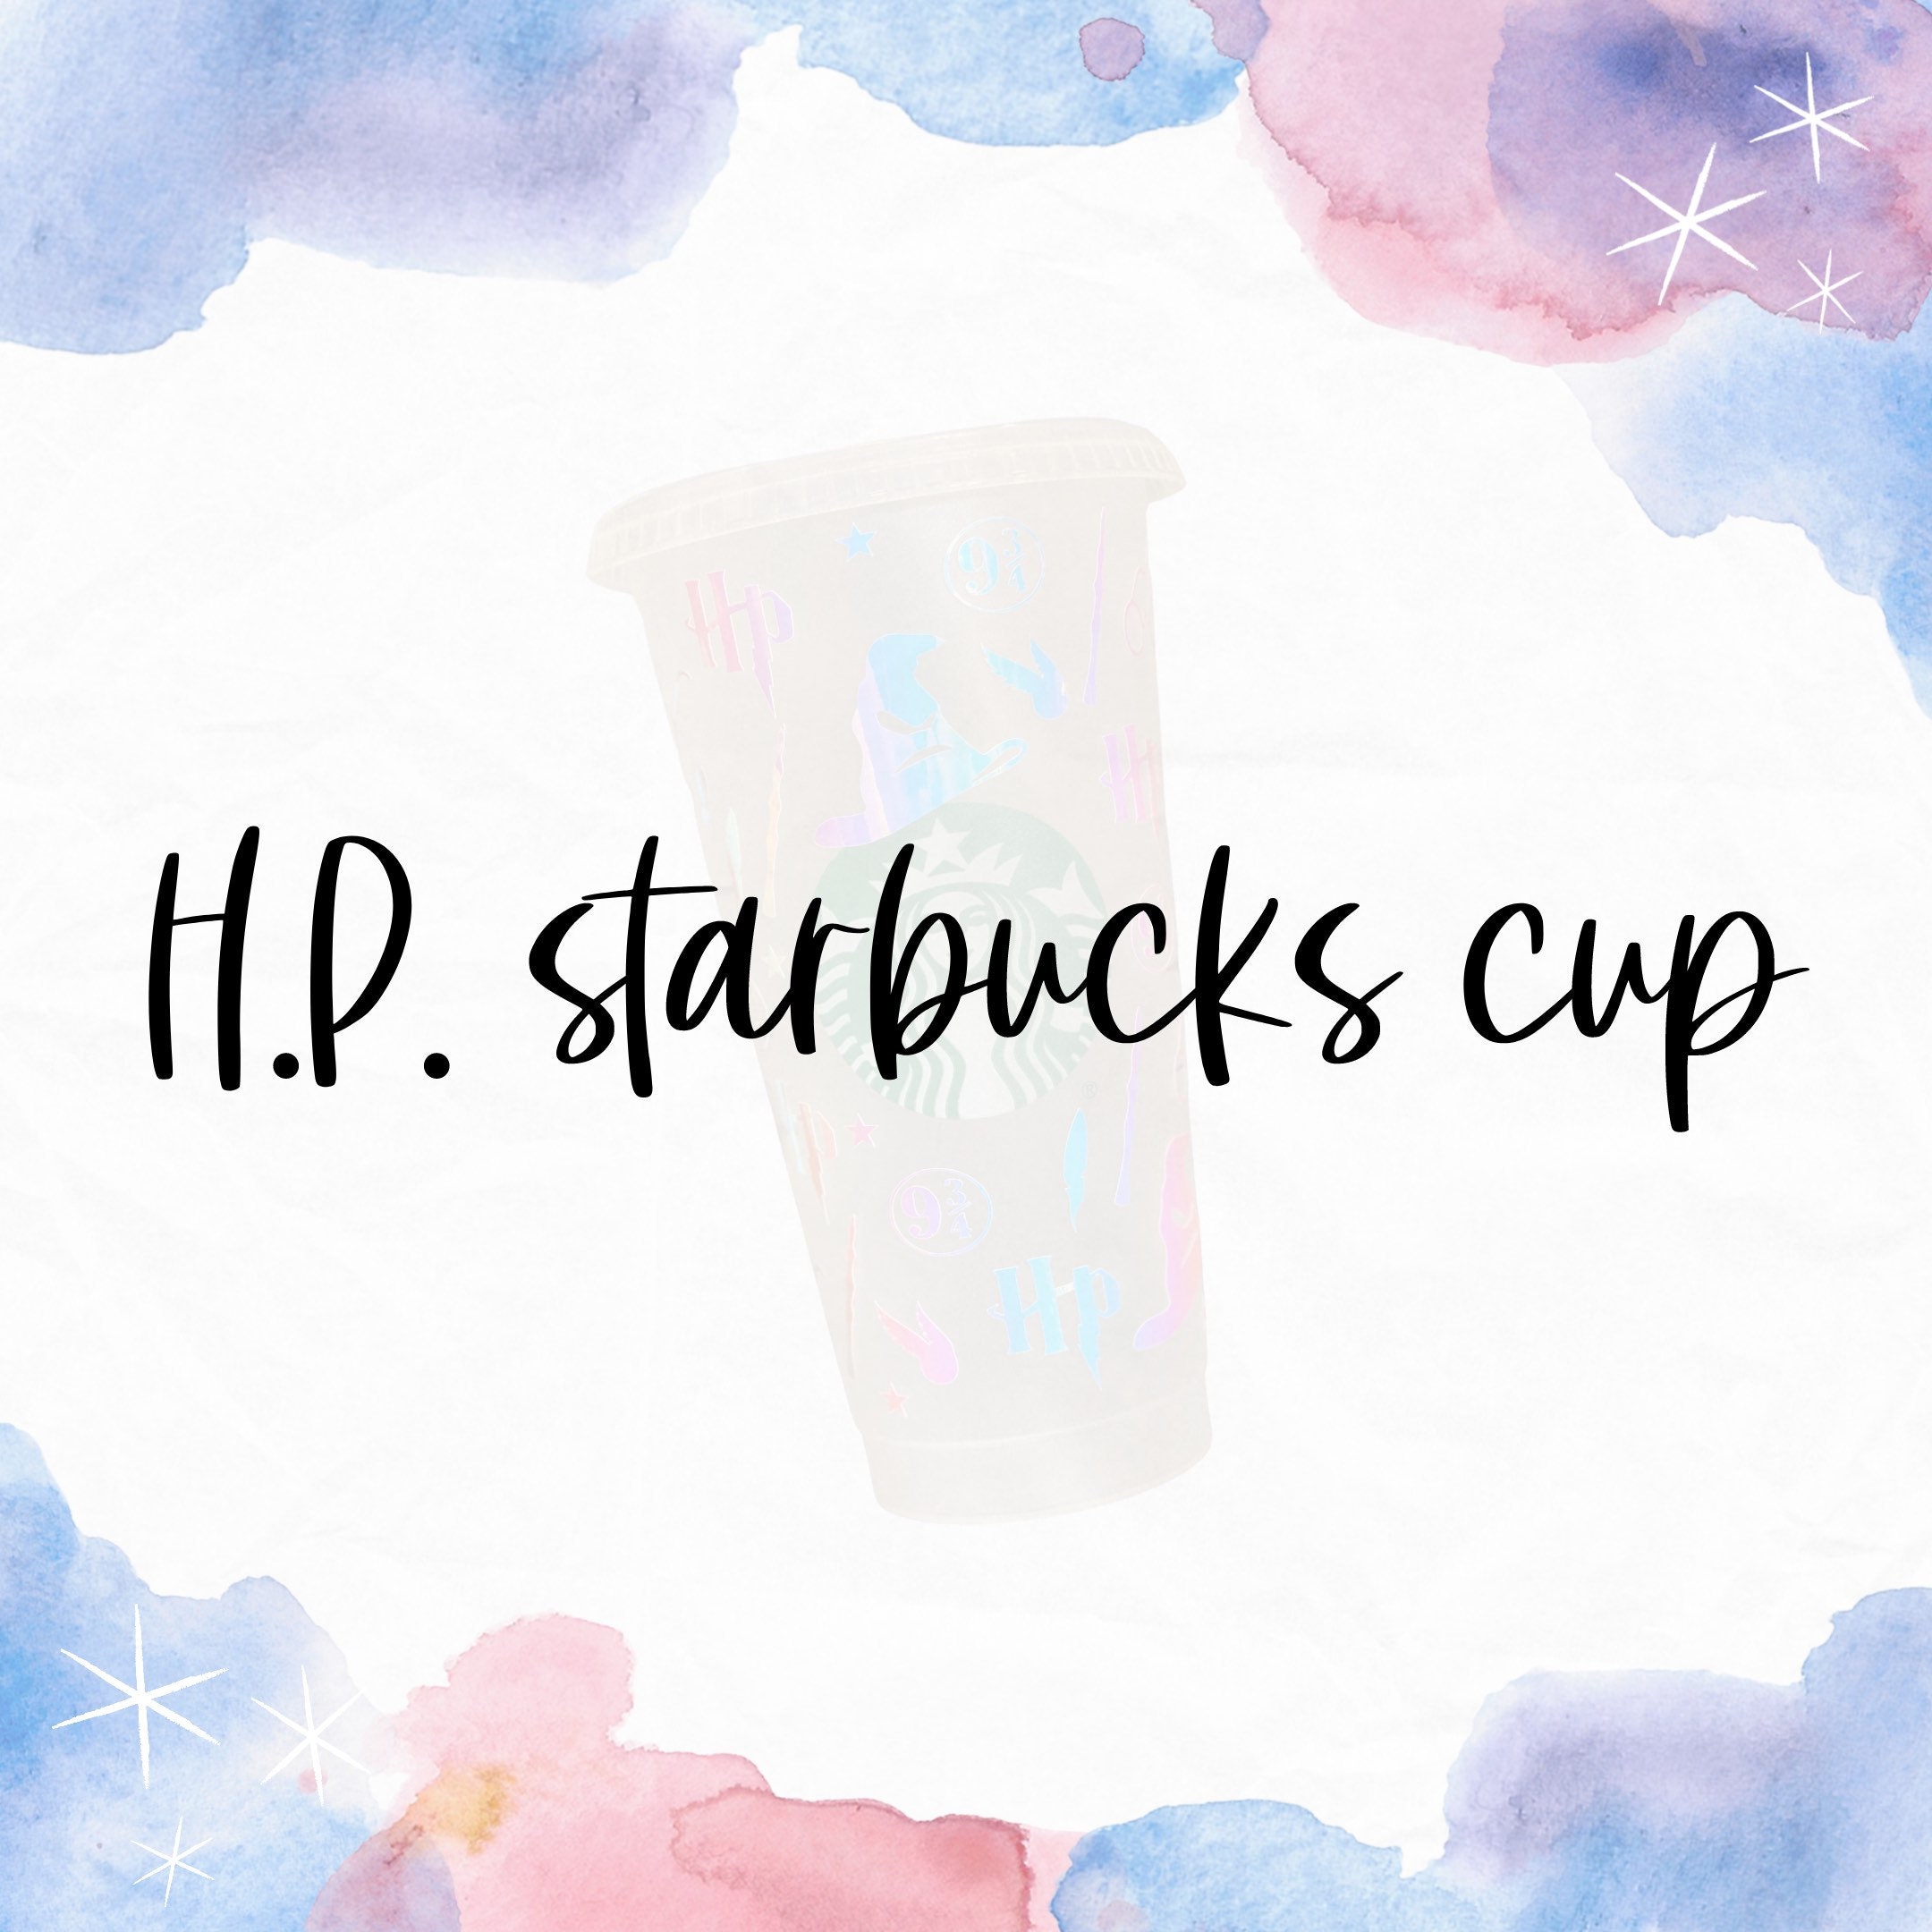 Showcase Your Hogwarts House Proudly With These Color Changing Starbucks  Cups - Inside the Magic